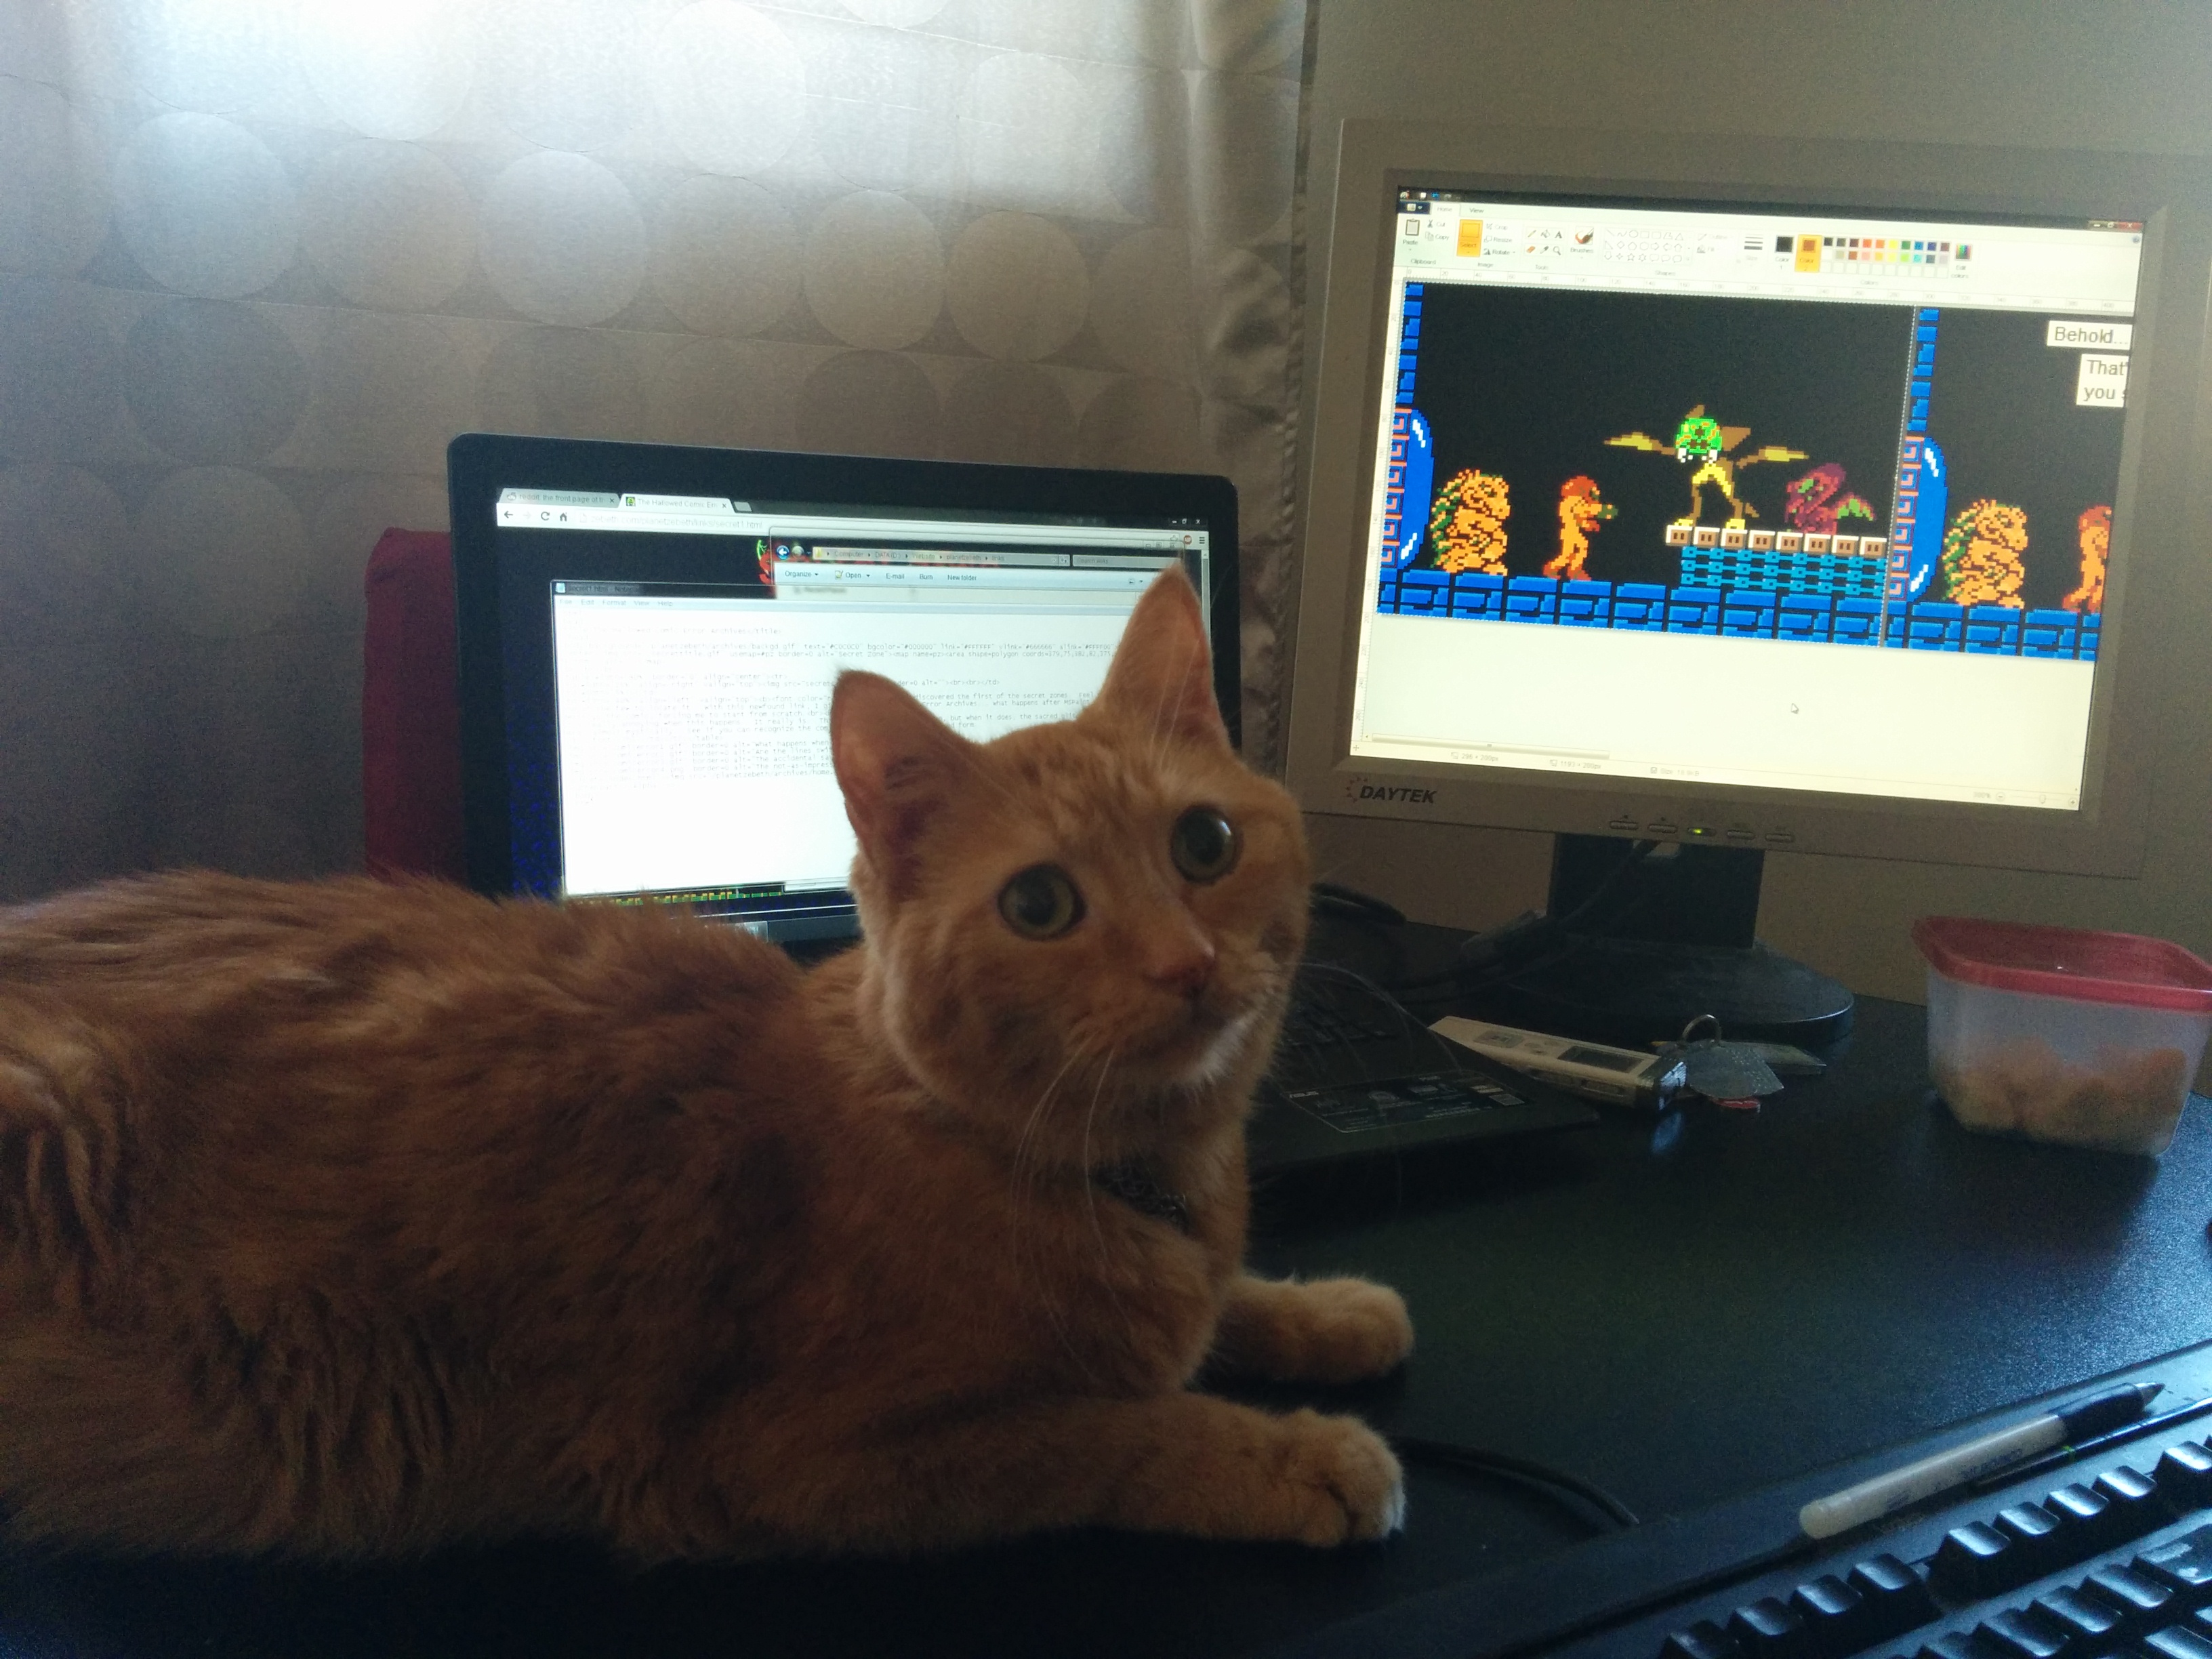 My last photo, Jack sitting in front of the keyboard on my desk, with the comic strip being made in the background.